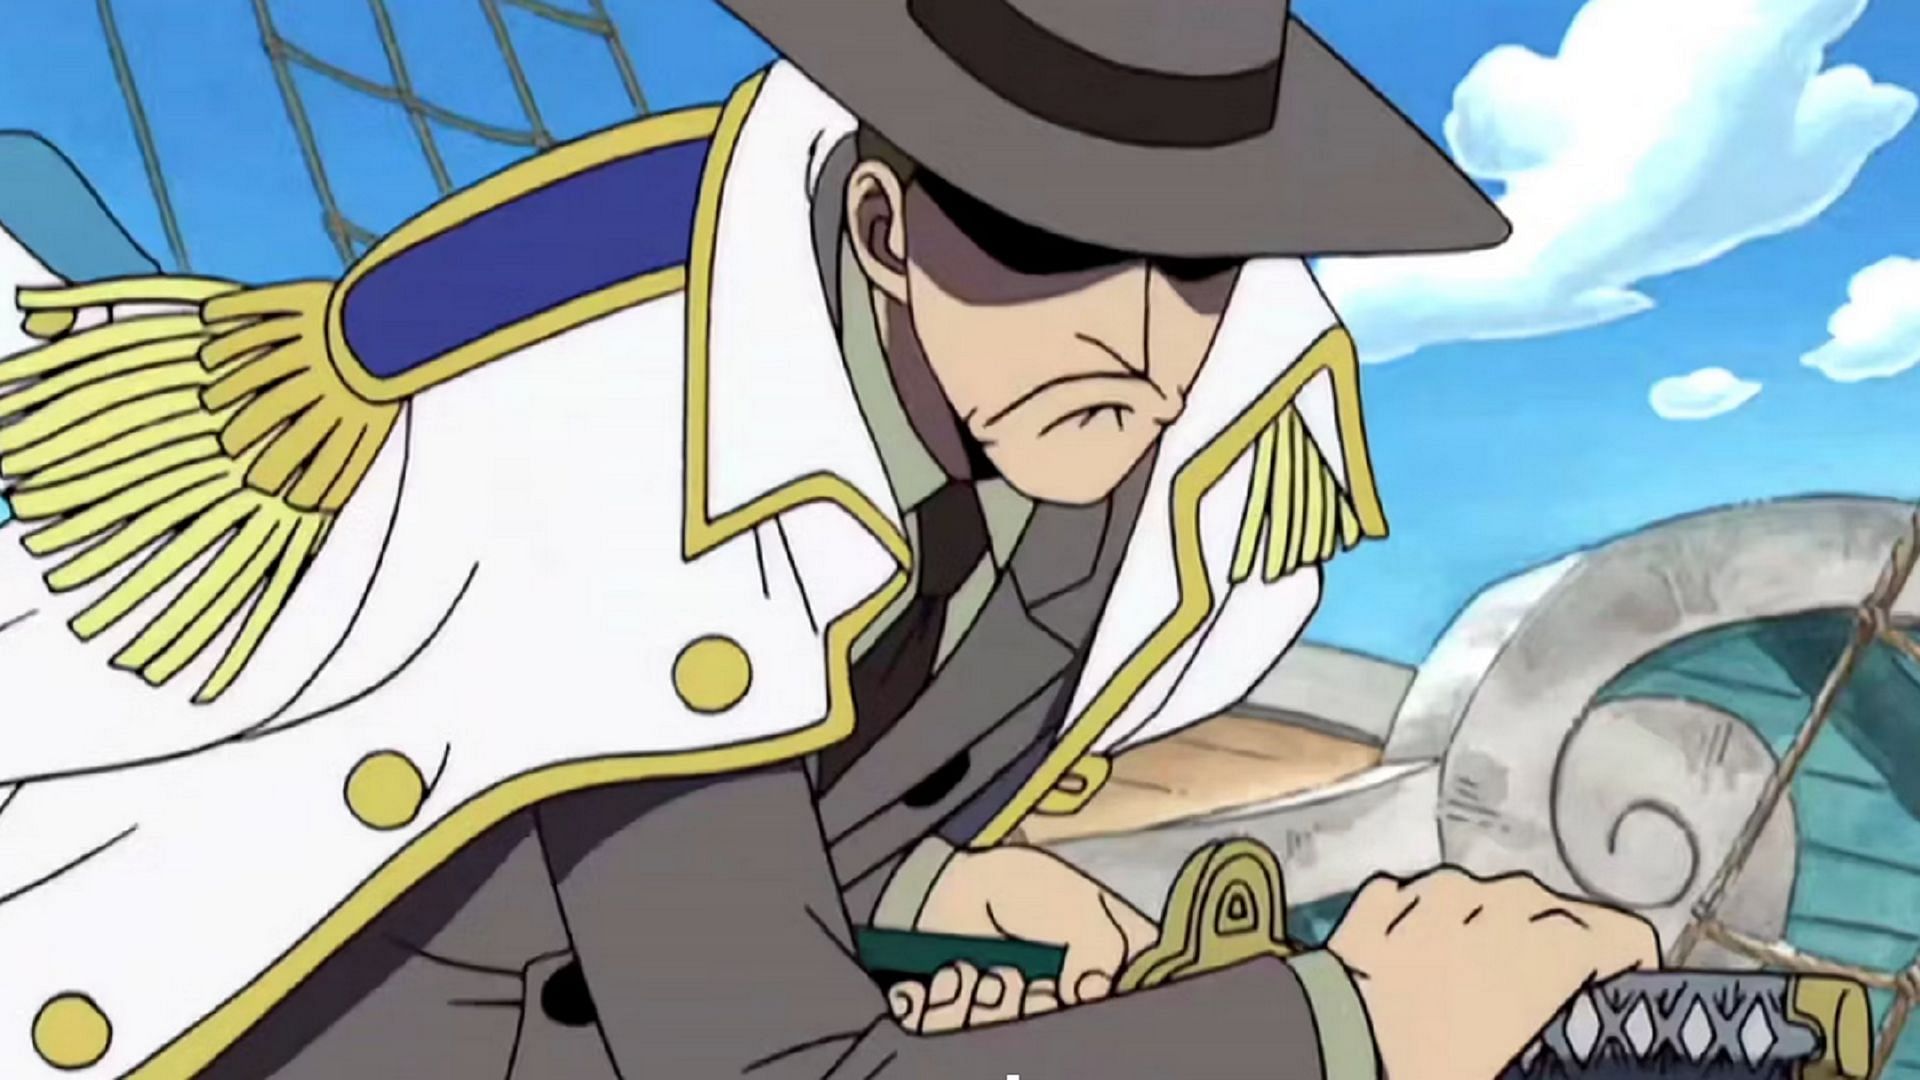 Bogard as seen in the One Piece anime (Image via Toei Animation, One Piece)